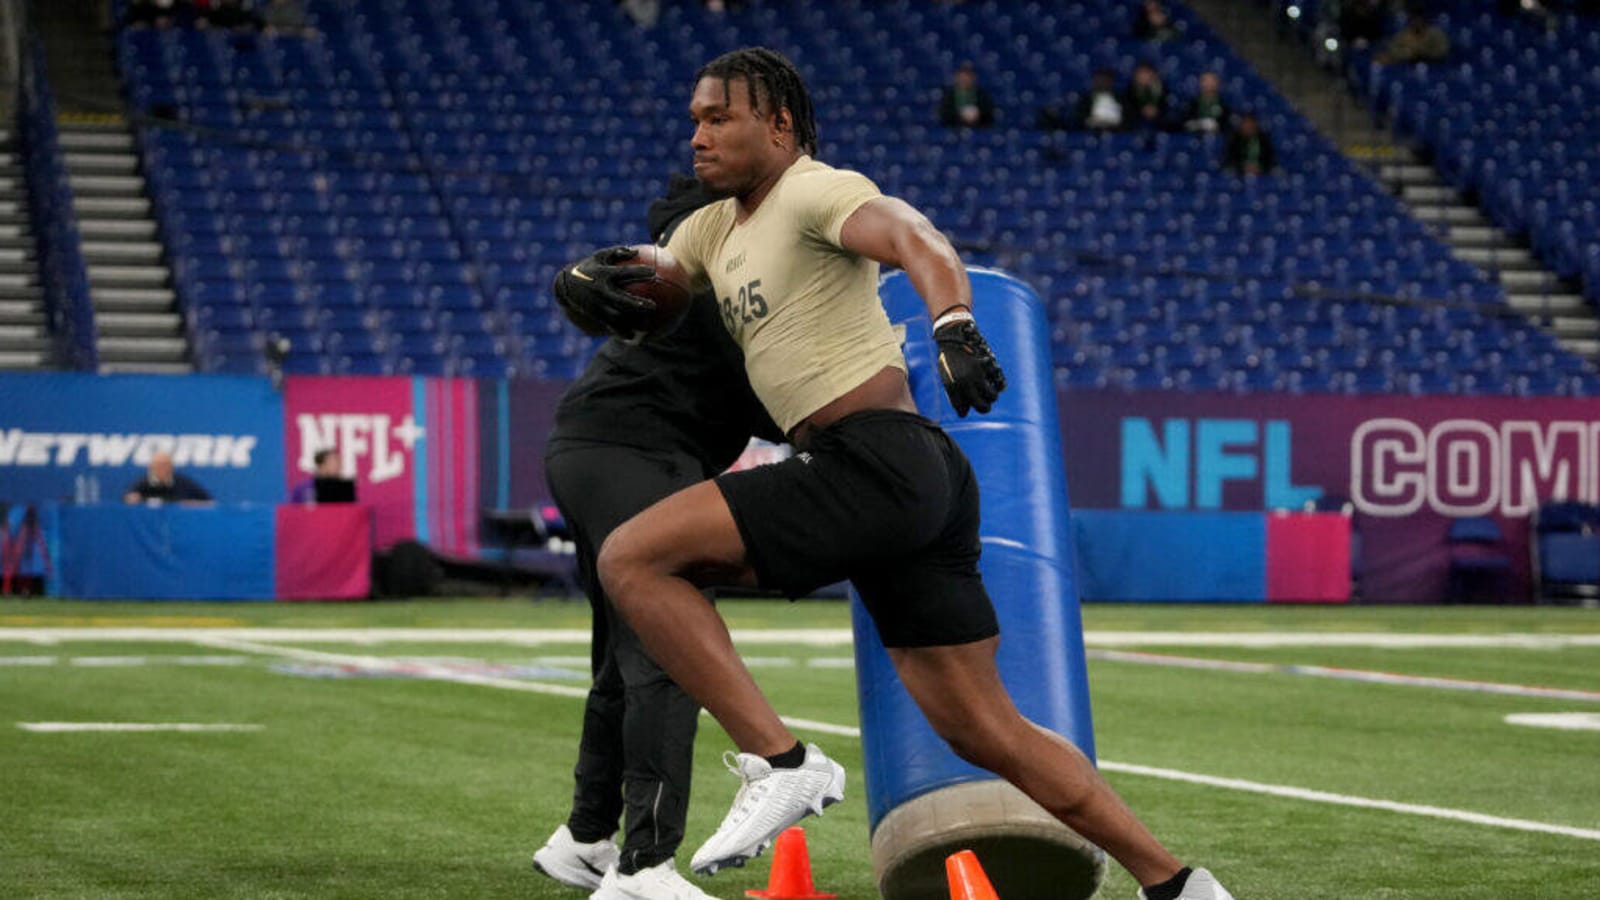 Tyrone Tracy Jr. 2024 NFL Draft: Combine Results, Scouting Report For New York Giants RB